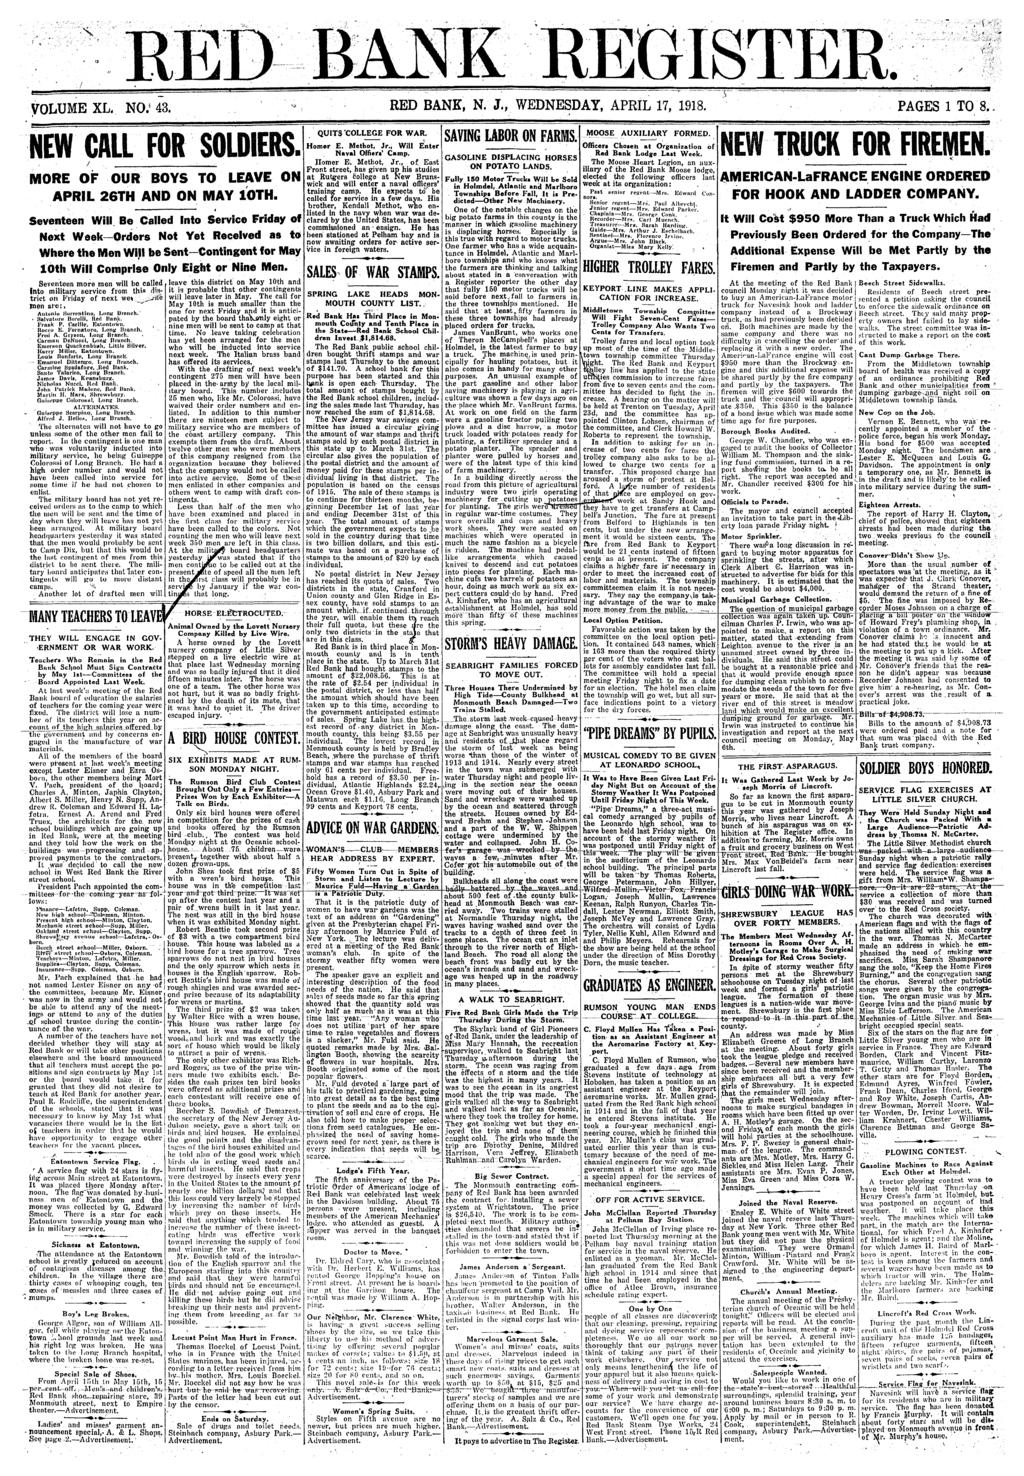 REGISTER VOLUME XL. NO. 1 43. RED BANK, N. J., WEDNESDAY, APRIL 17, 1918. PAGES 1 TO 8. NEW CALL FOR SOLDIERS., /. MORE OF OUR BOYS TO LEAVE ON APRIL 26TH AND ON MAY loth.